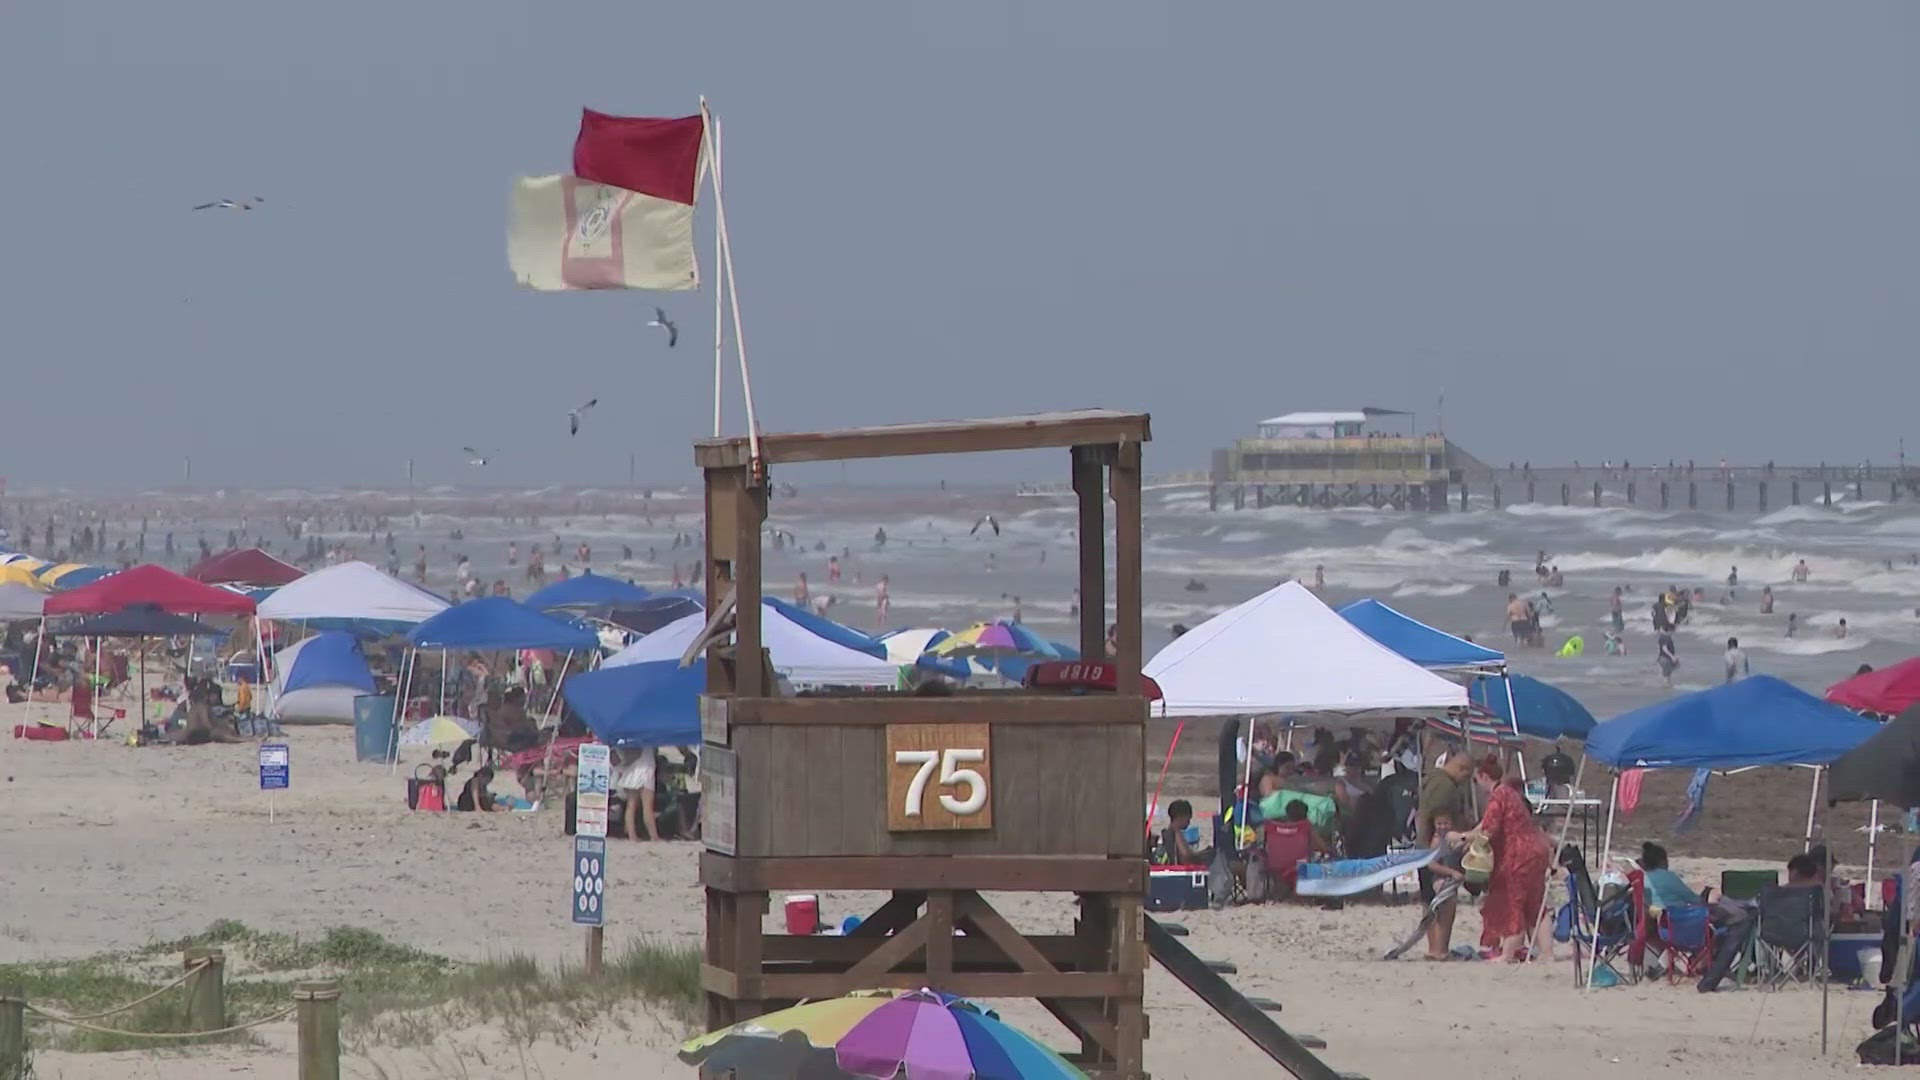 Witnesses said the girl was bodysurfing with her brother when they noticed she was struggling in the water.